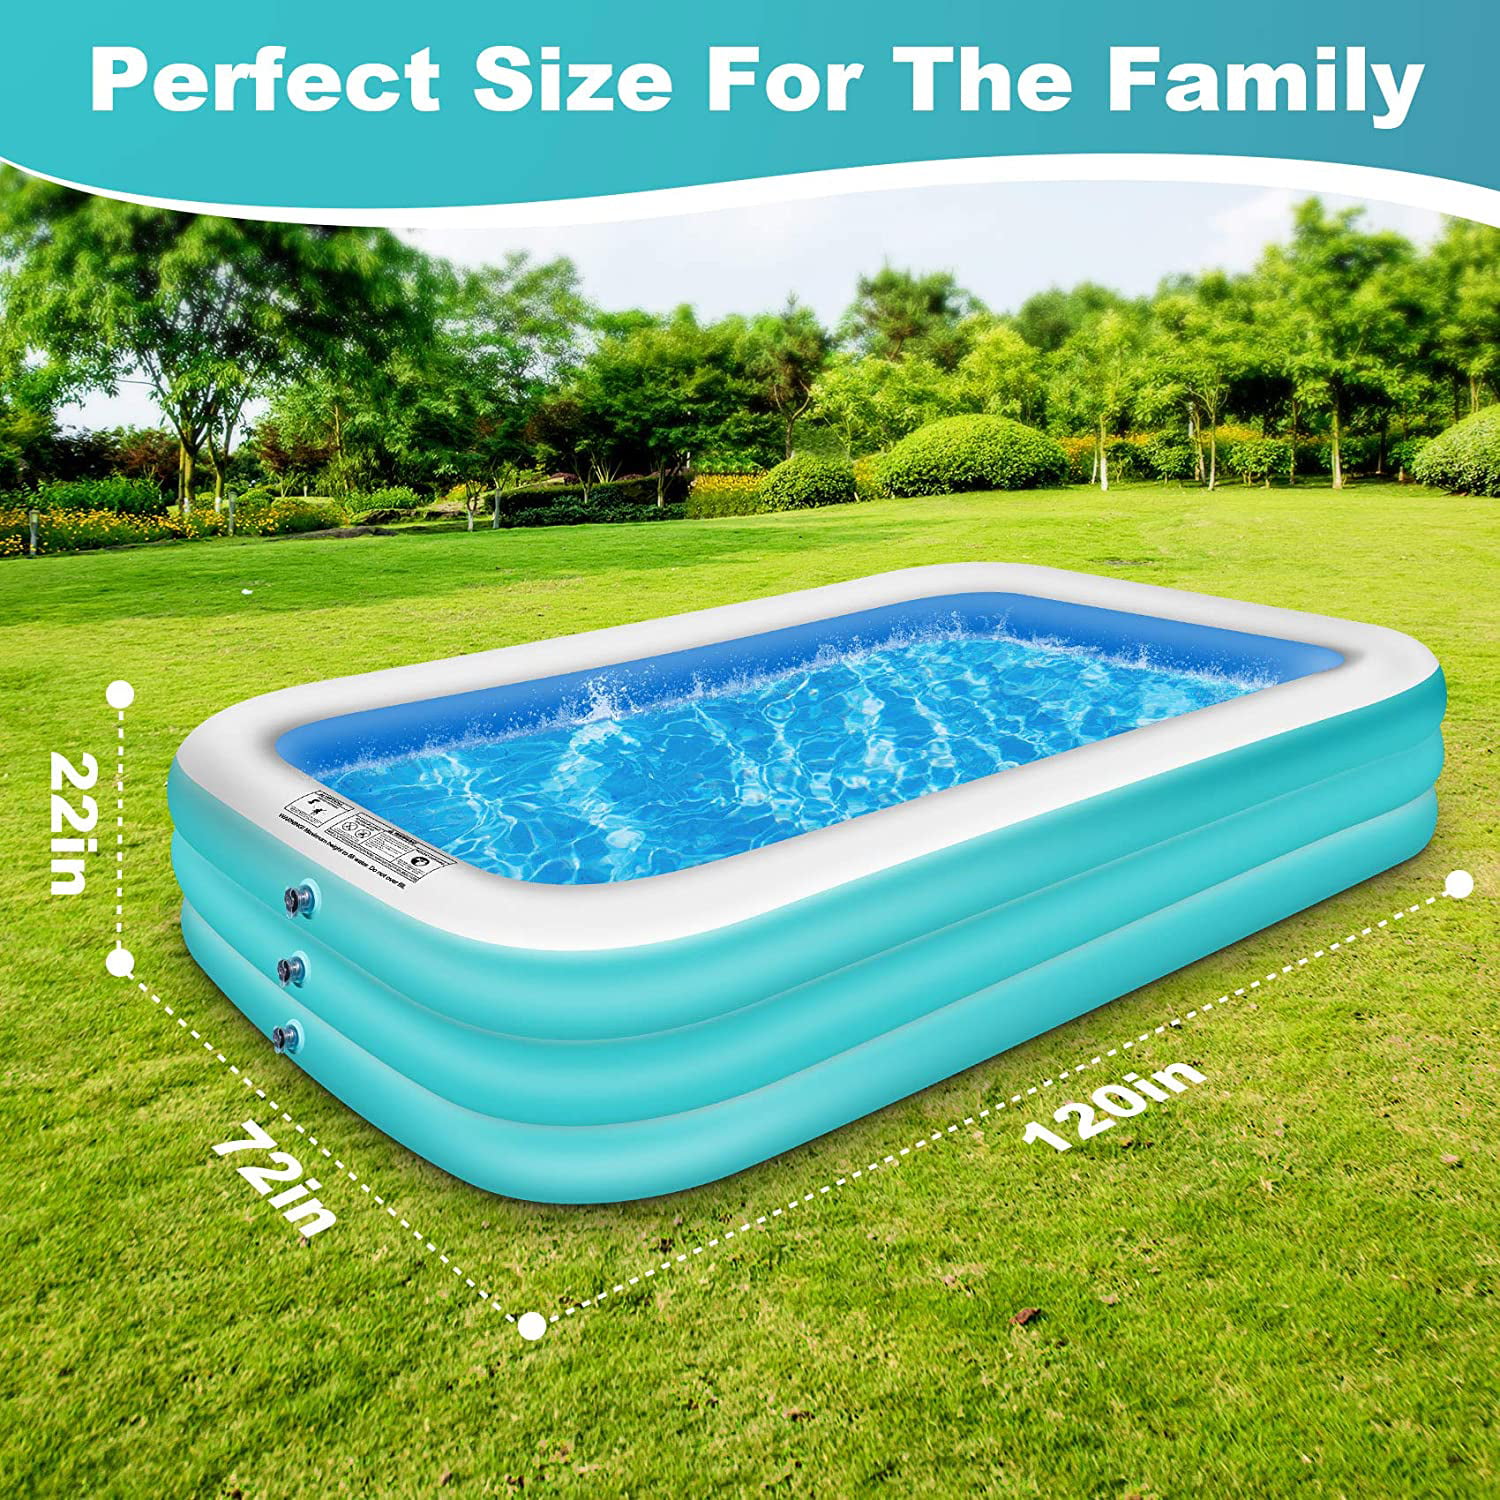 120 x 72 x 22 Large Full-Sized Inflatable Swimming Pools for Kids and Adults Blow up Pool CHERYLON Inflatable Pool Backyard Family Lounge Pool 